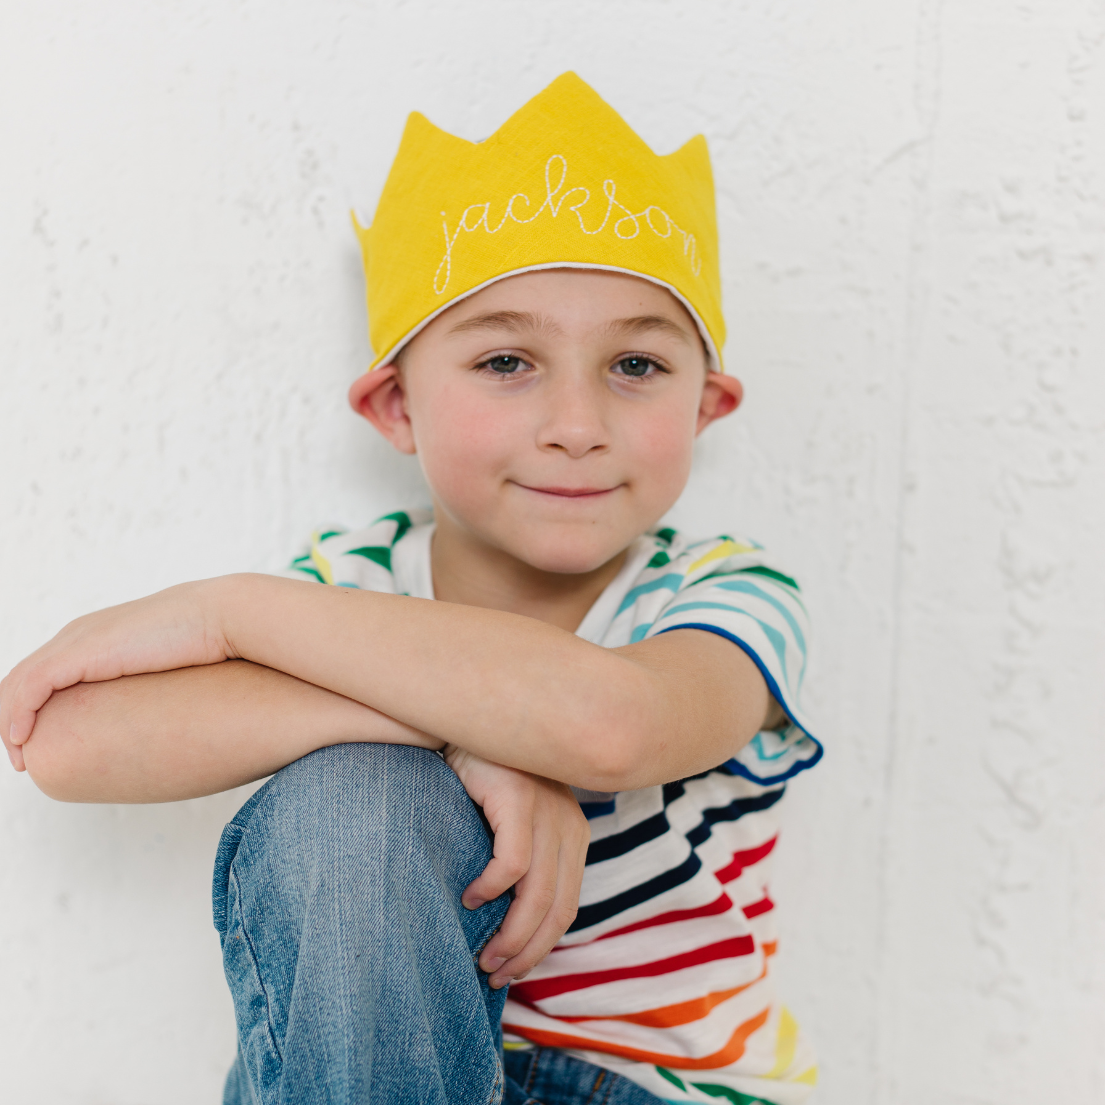 boy wearing gold birthday crown with his name on it